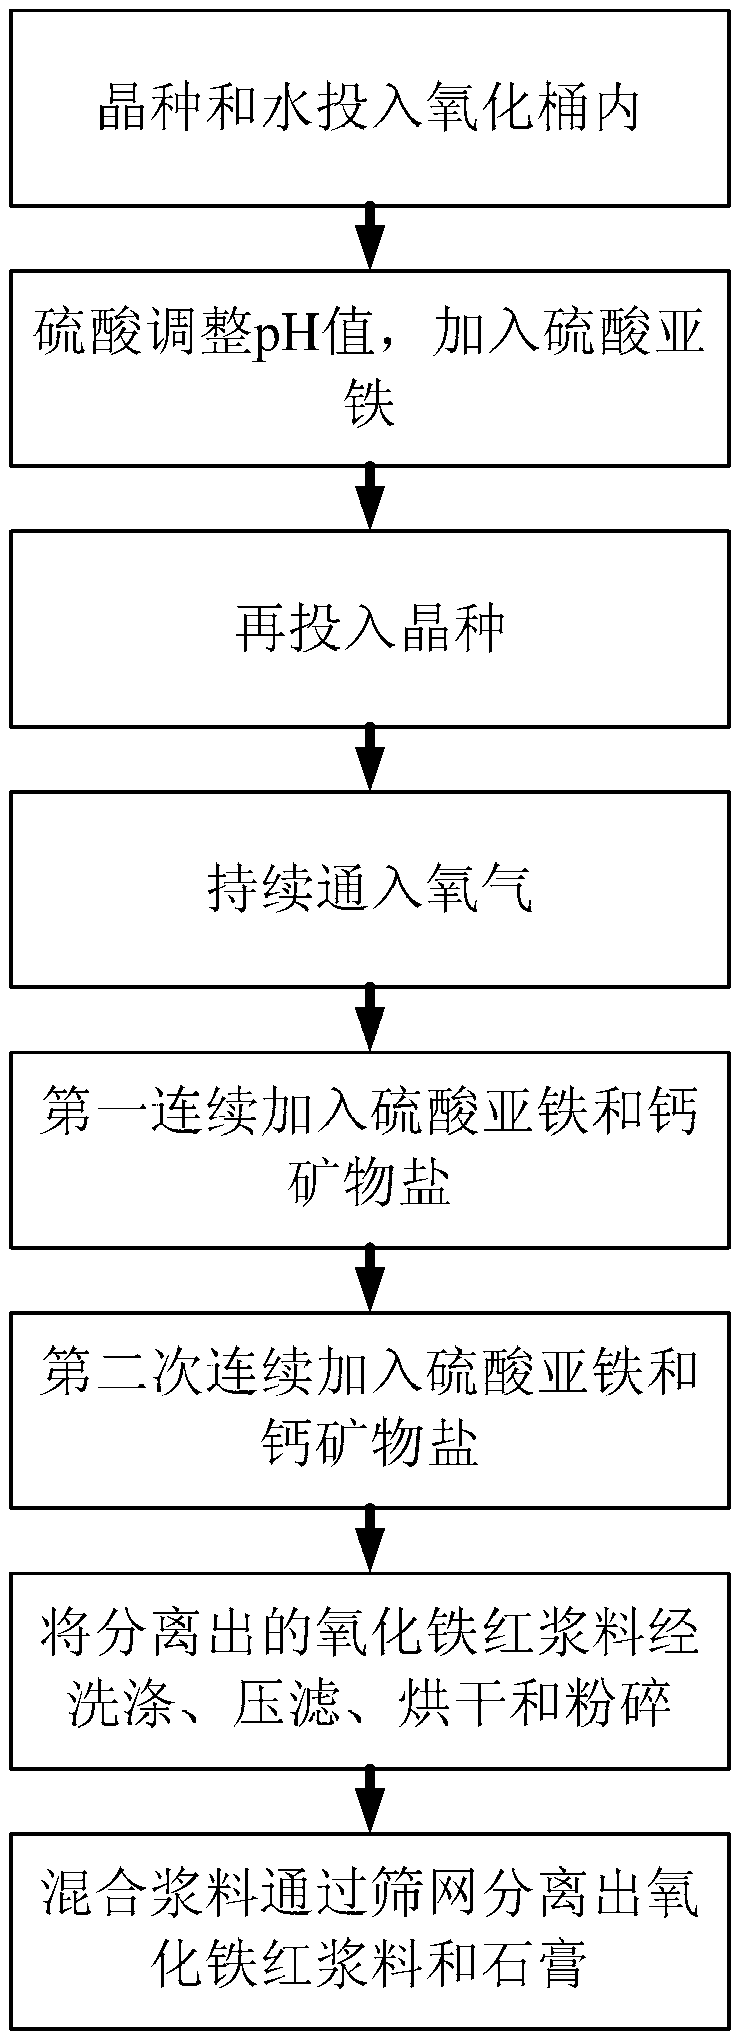 Two-step oxidation production method for iron oxide red pigment